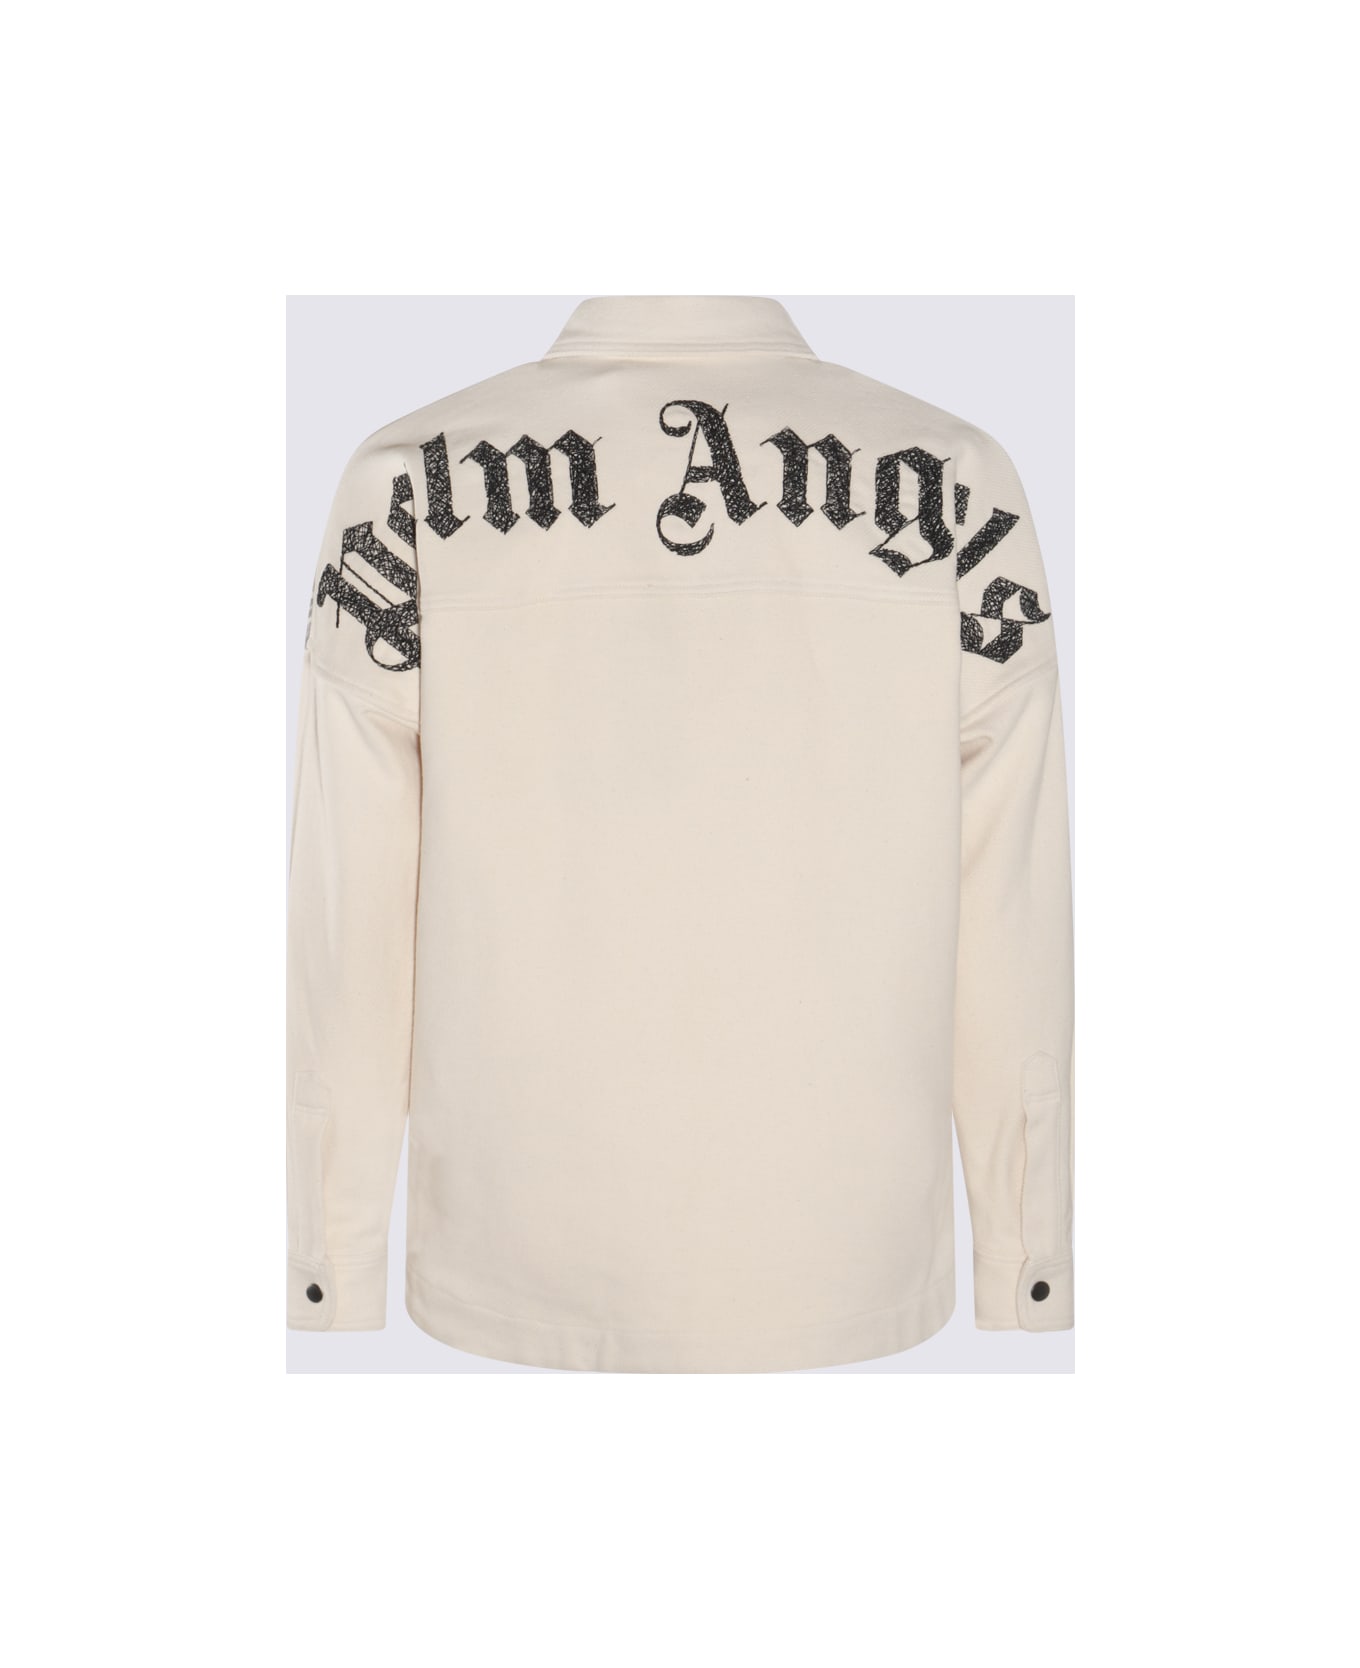 Palm Angels White Cotton Shirt - OFF WHITE ANTHRACITE